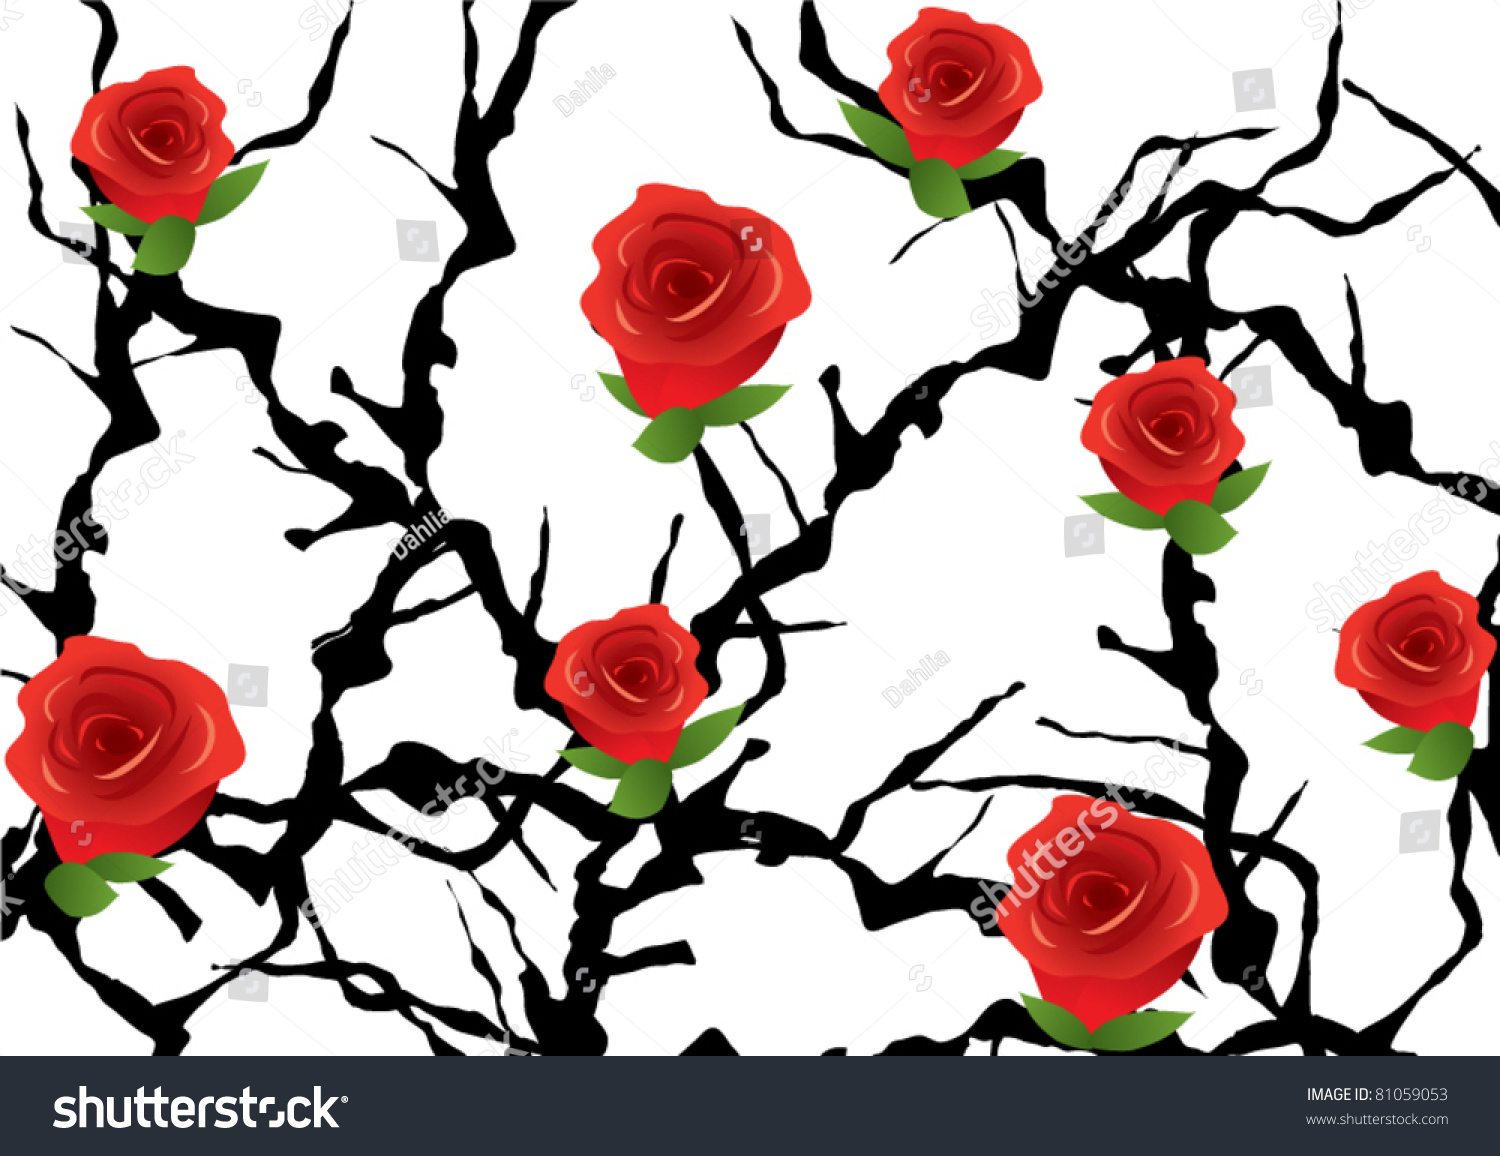 Vector Blackthorn Bush With Roses - 81059053 : Shutterstock